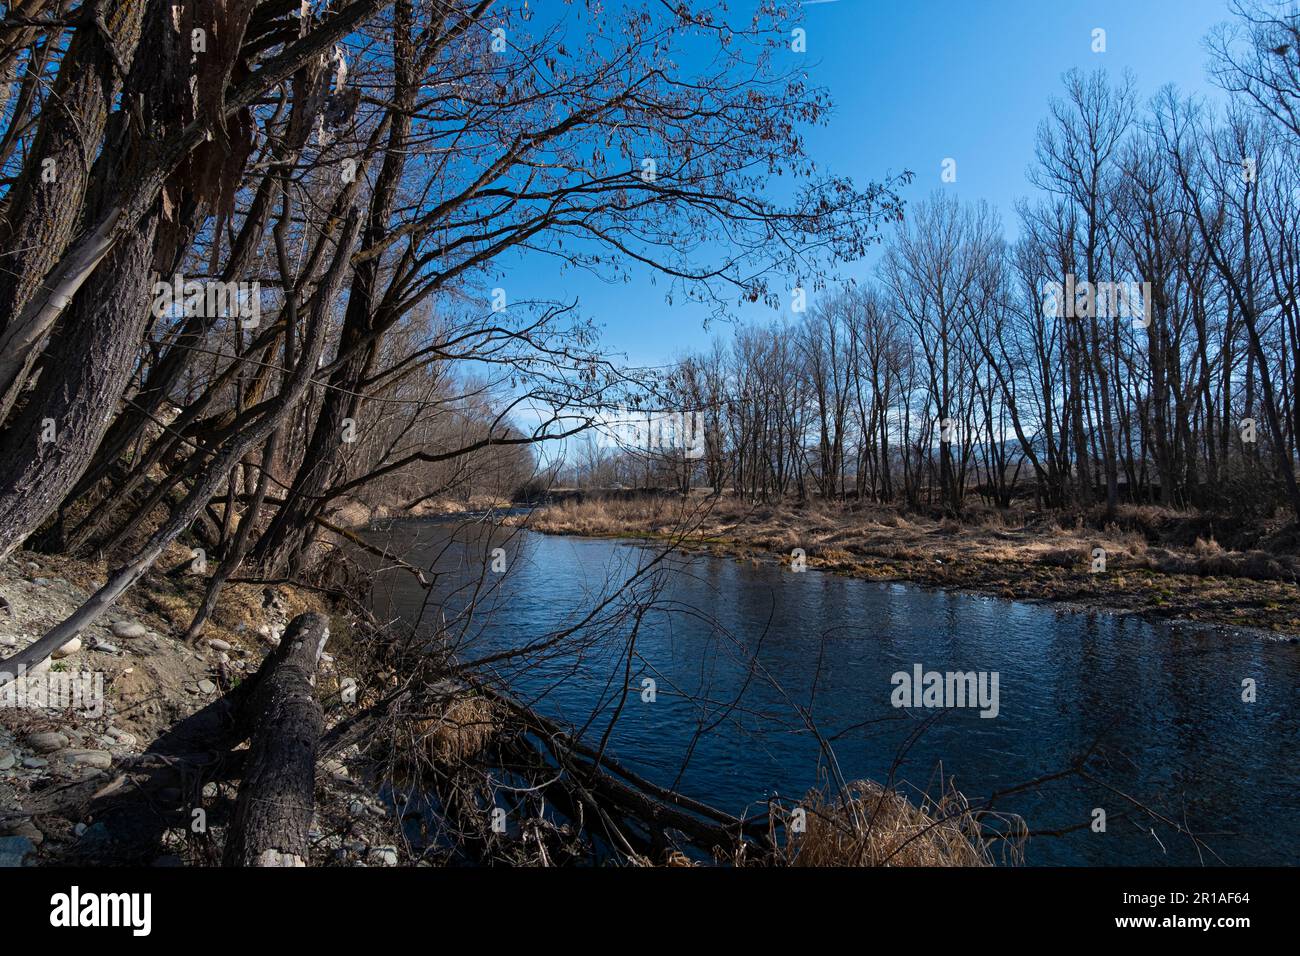 Rolling Stones on a river water edge landscape with leafless winter forest in the background Stock Photo